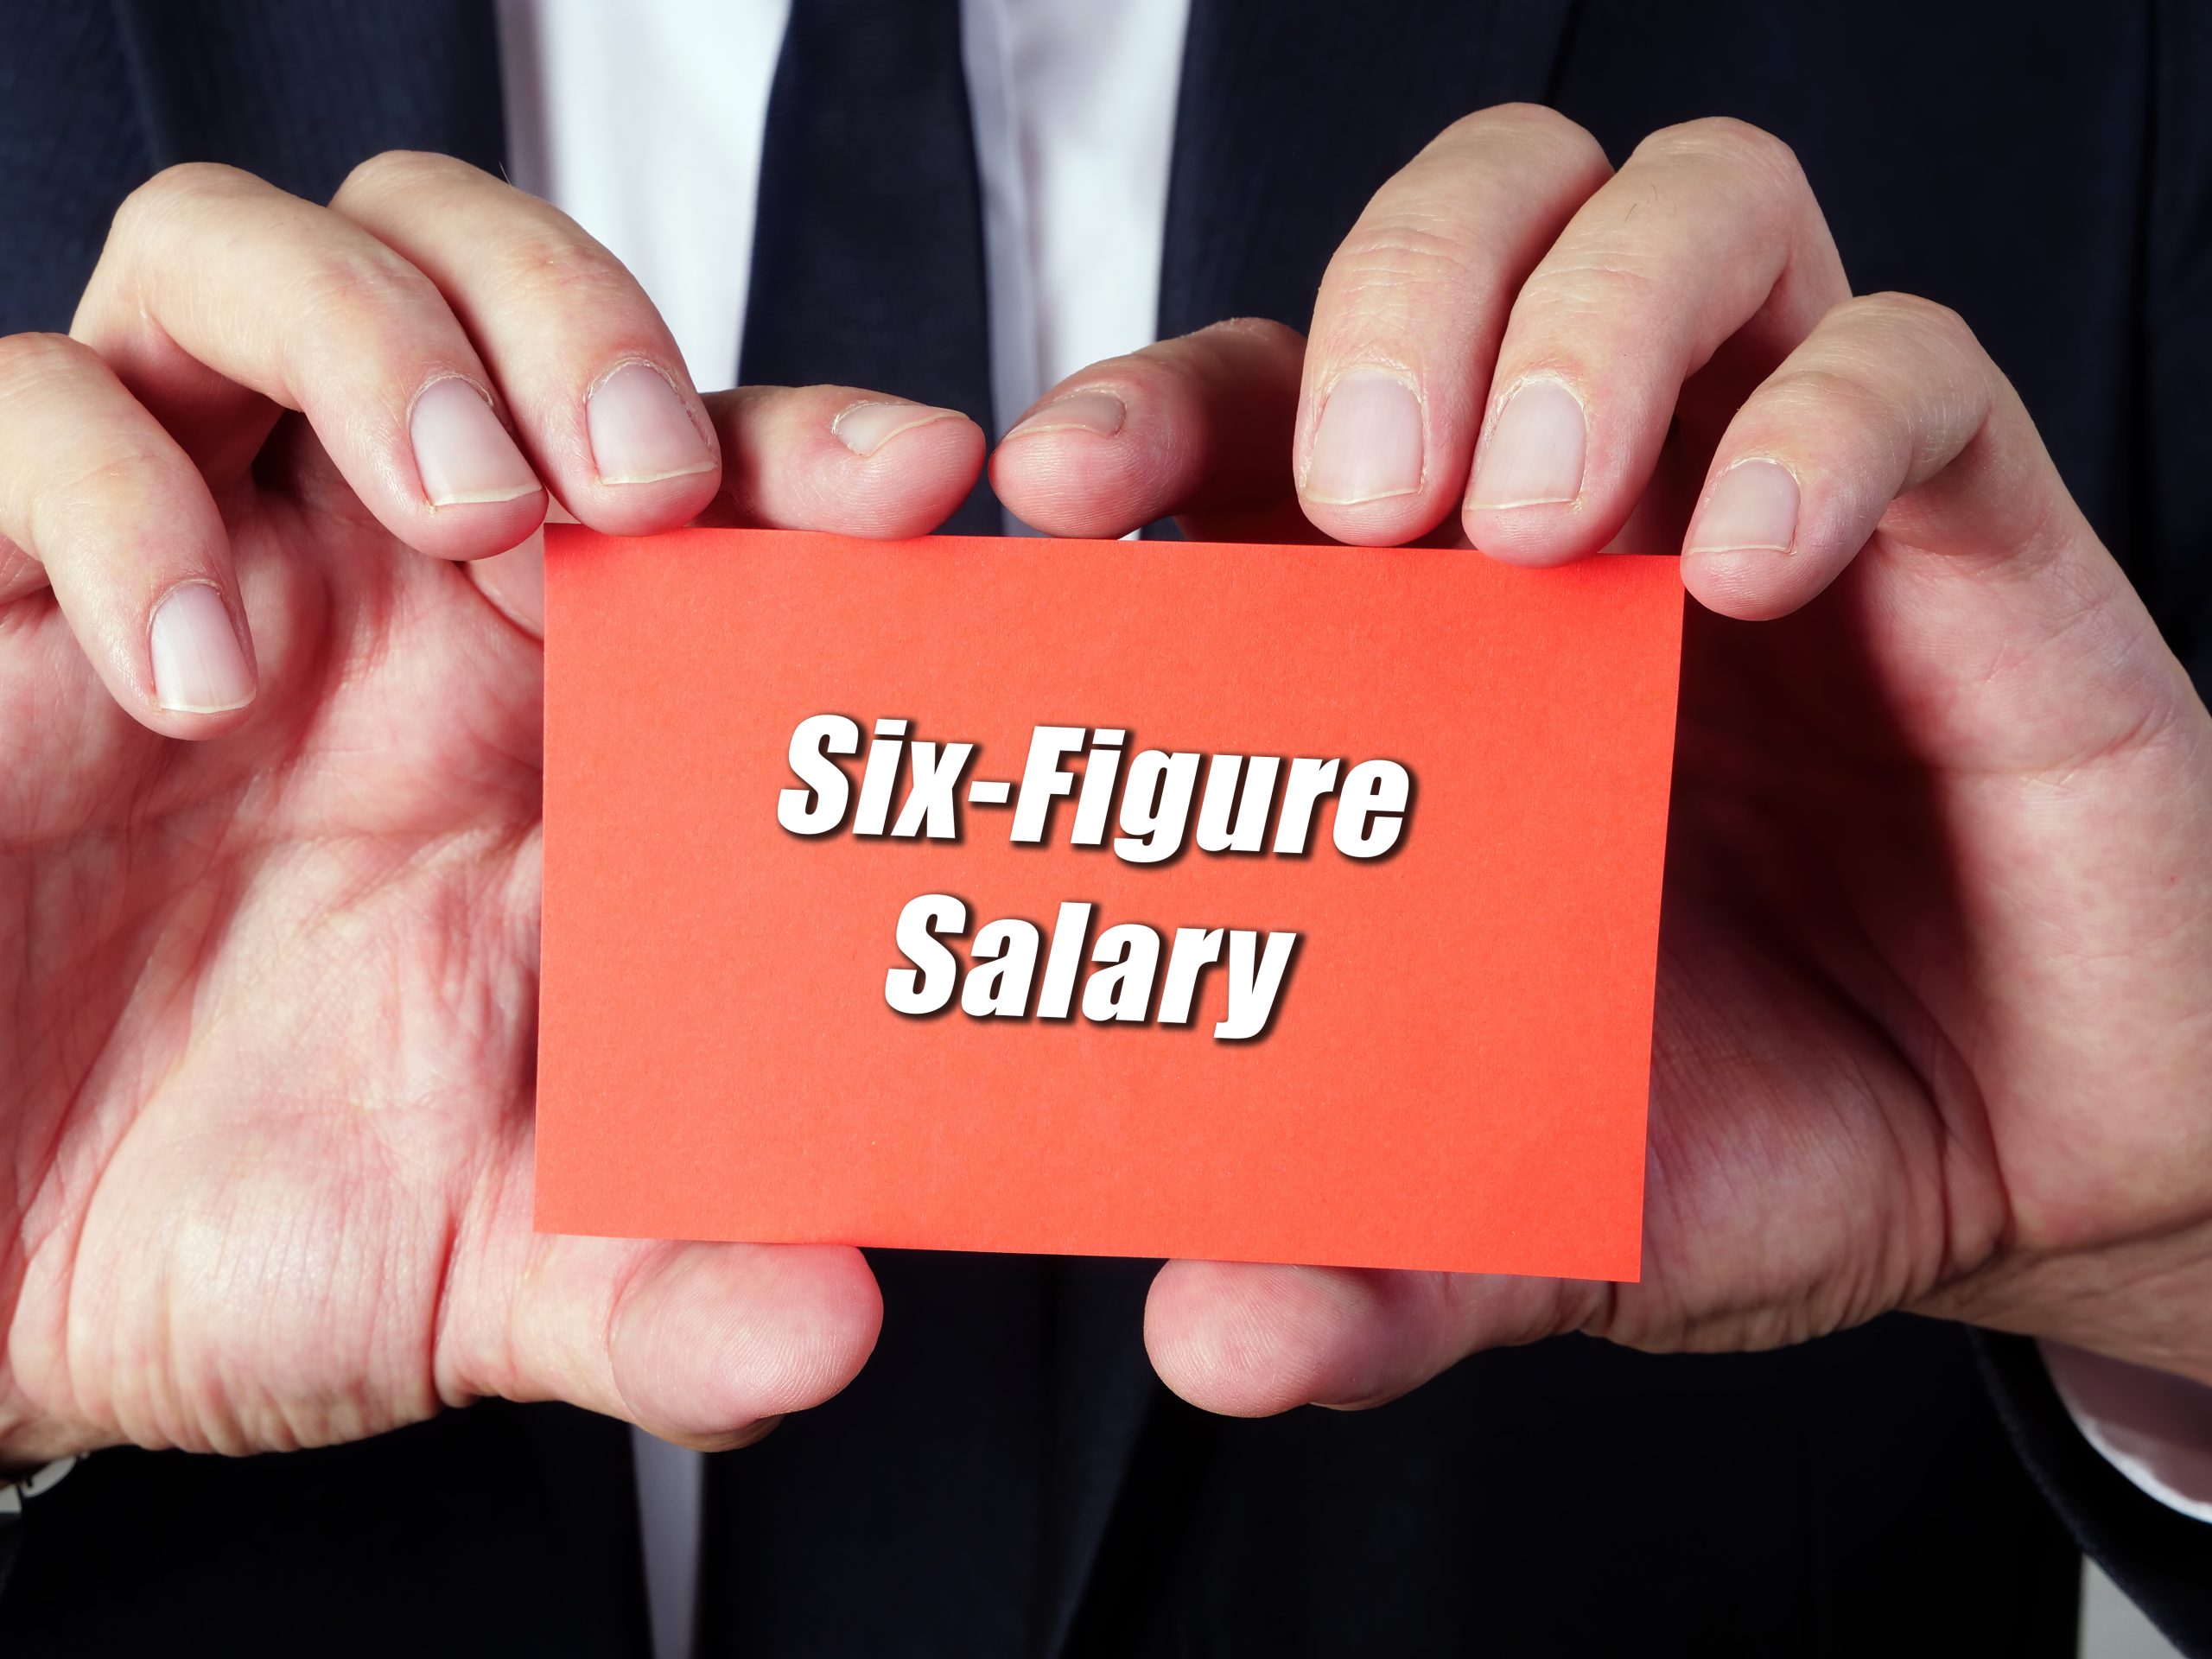 Image of a six-figure salary sign for our FAQ on Is a Master’s Degree Necessary to Earn a Six-Figure Salary